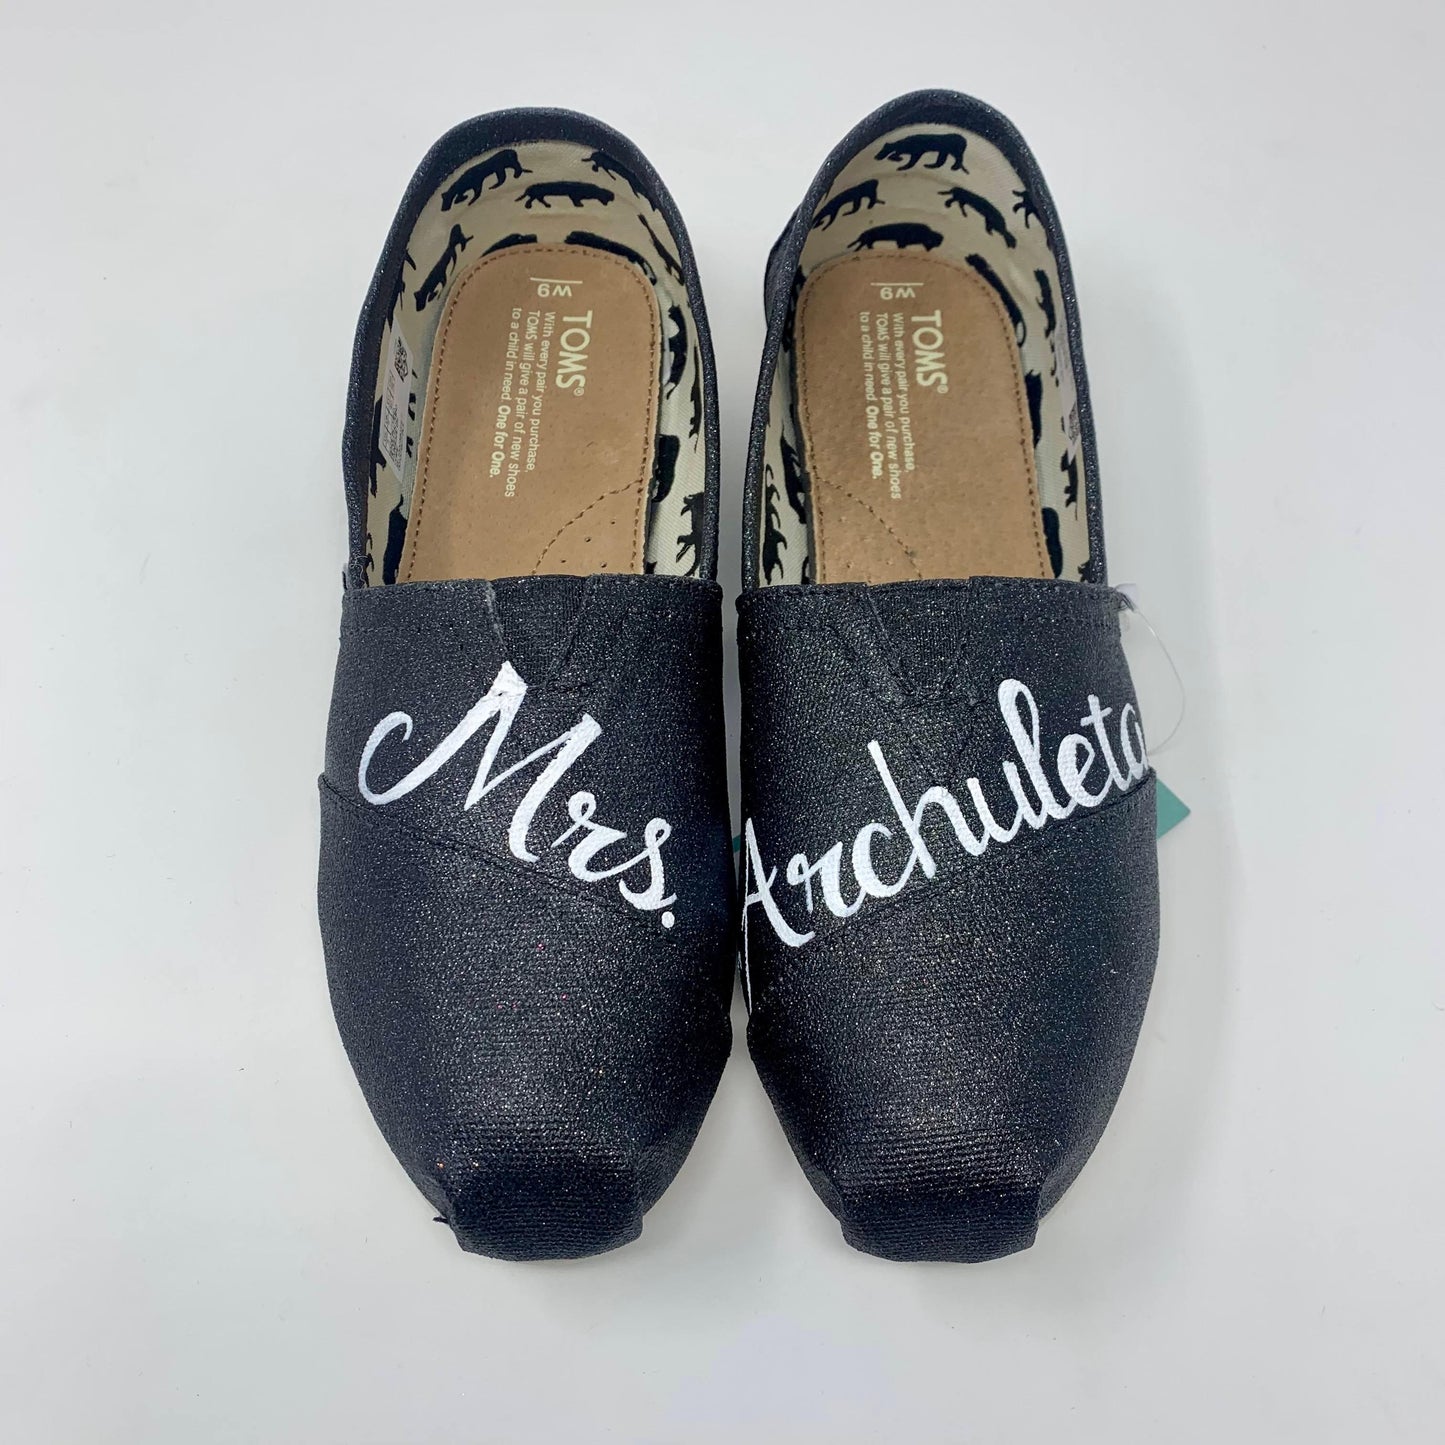 Black Glitter Wedding Shoes-Shoes-ButterMakesMeHappy